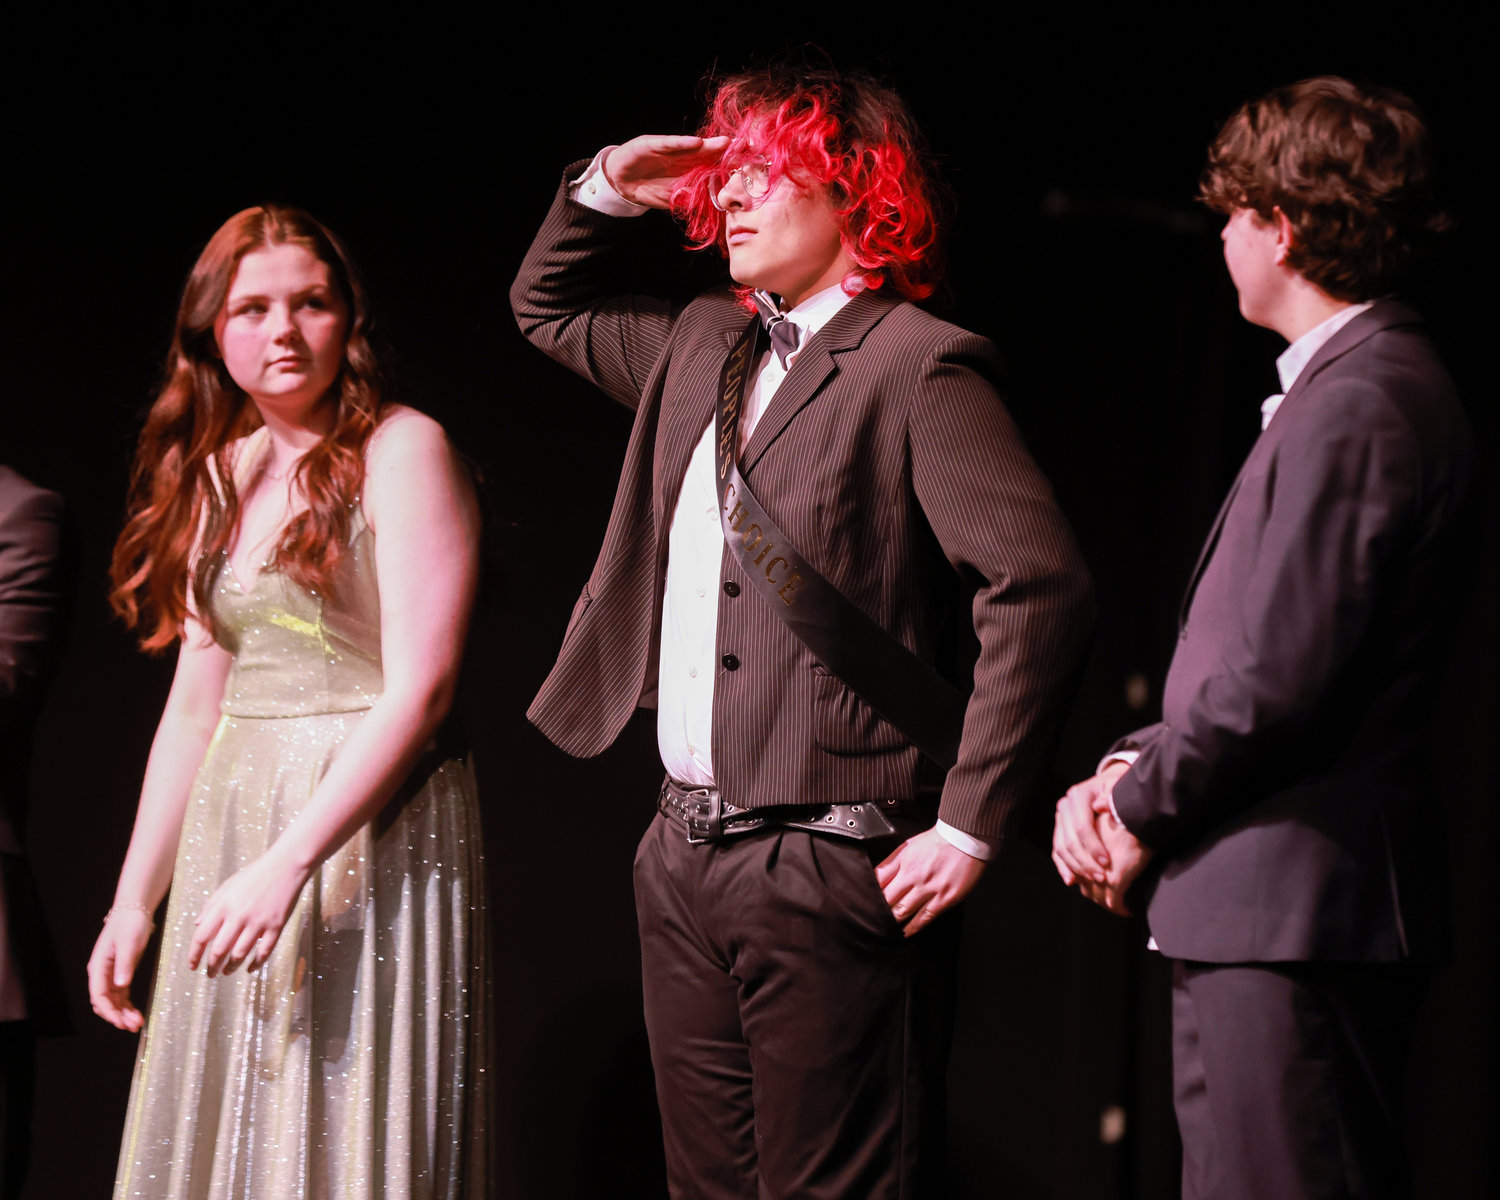 Best of BG people's choice winner, Logen Neilson, salutes the crowd on Saturday, March 25 at Battle Ground High School.